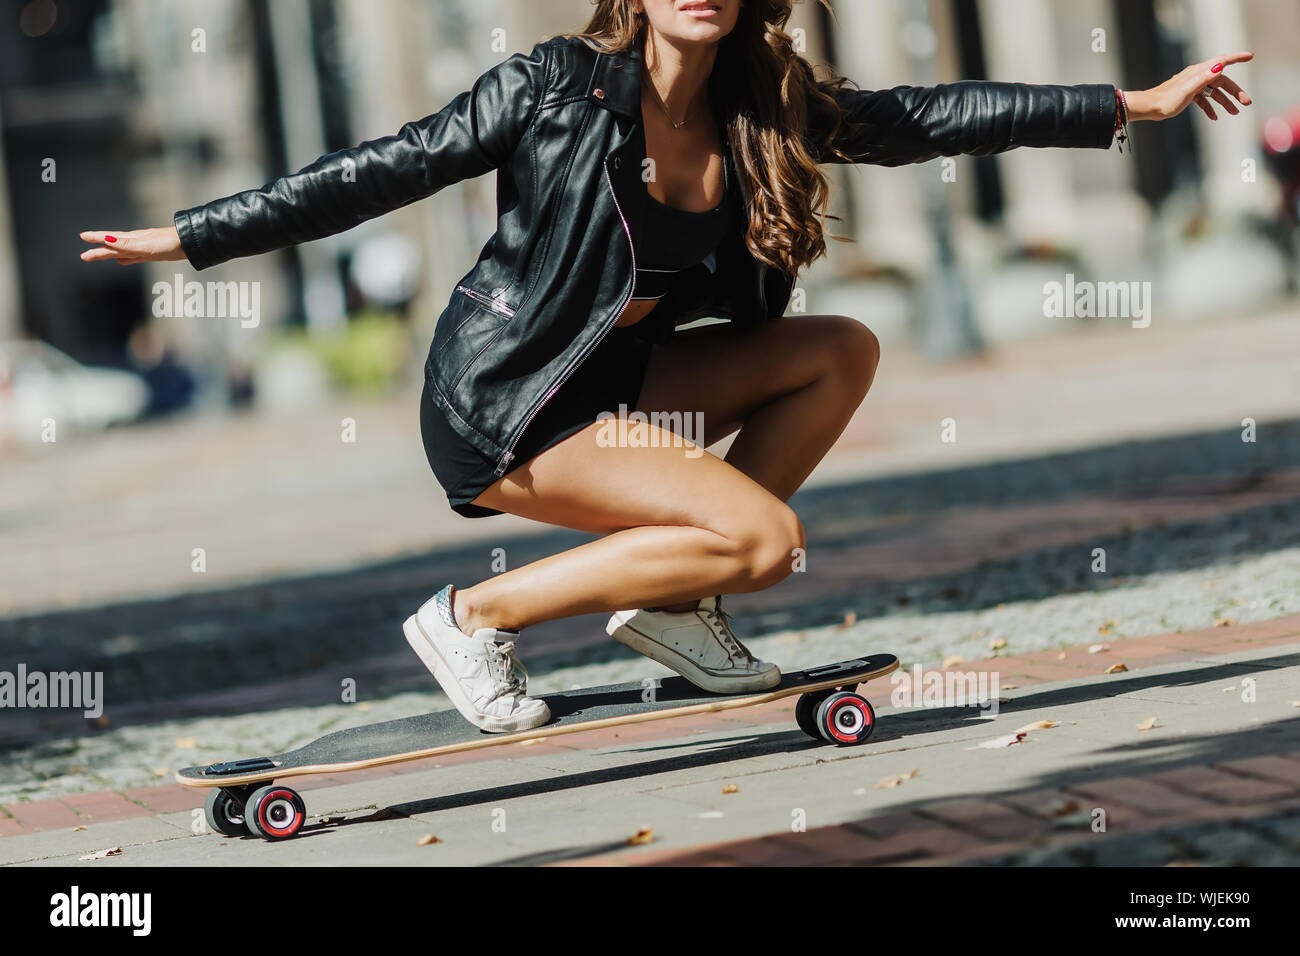 Beautiful young skater woman riding on her longboard in the city. Stylish  girl in street clothes rides on a longboard. Skateboard, street photo, life  Stock Photo - Alamy